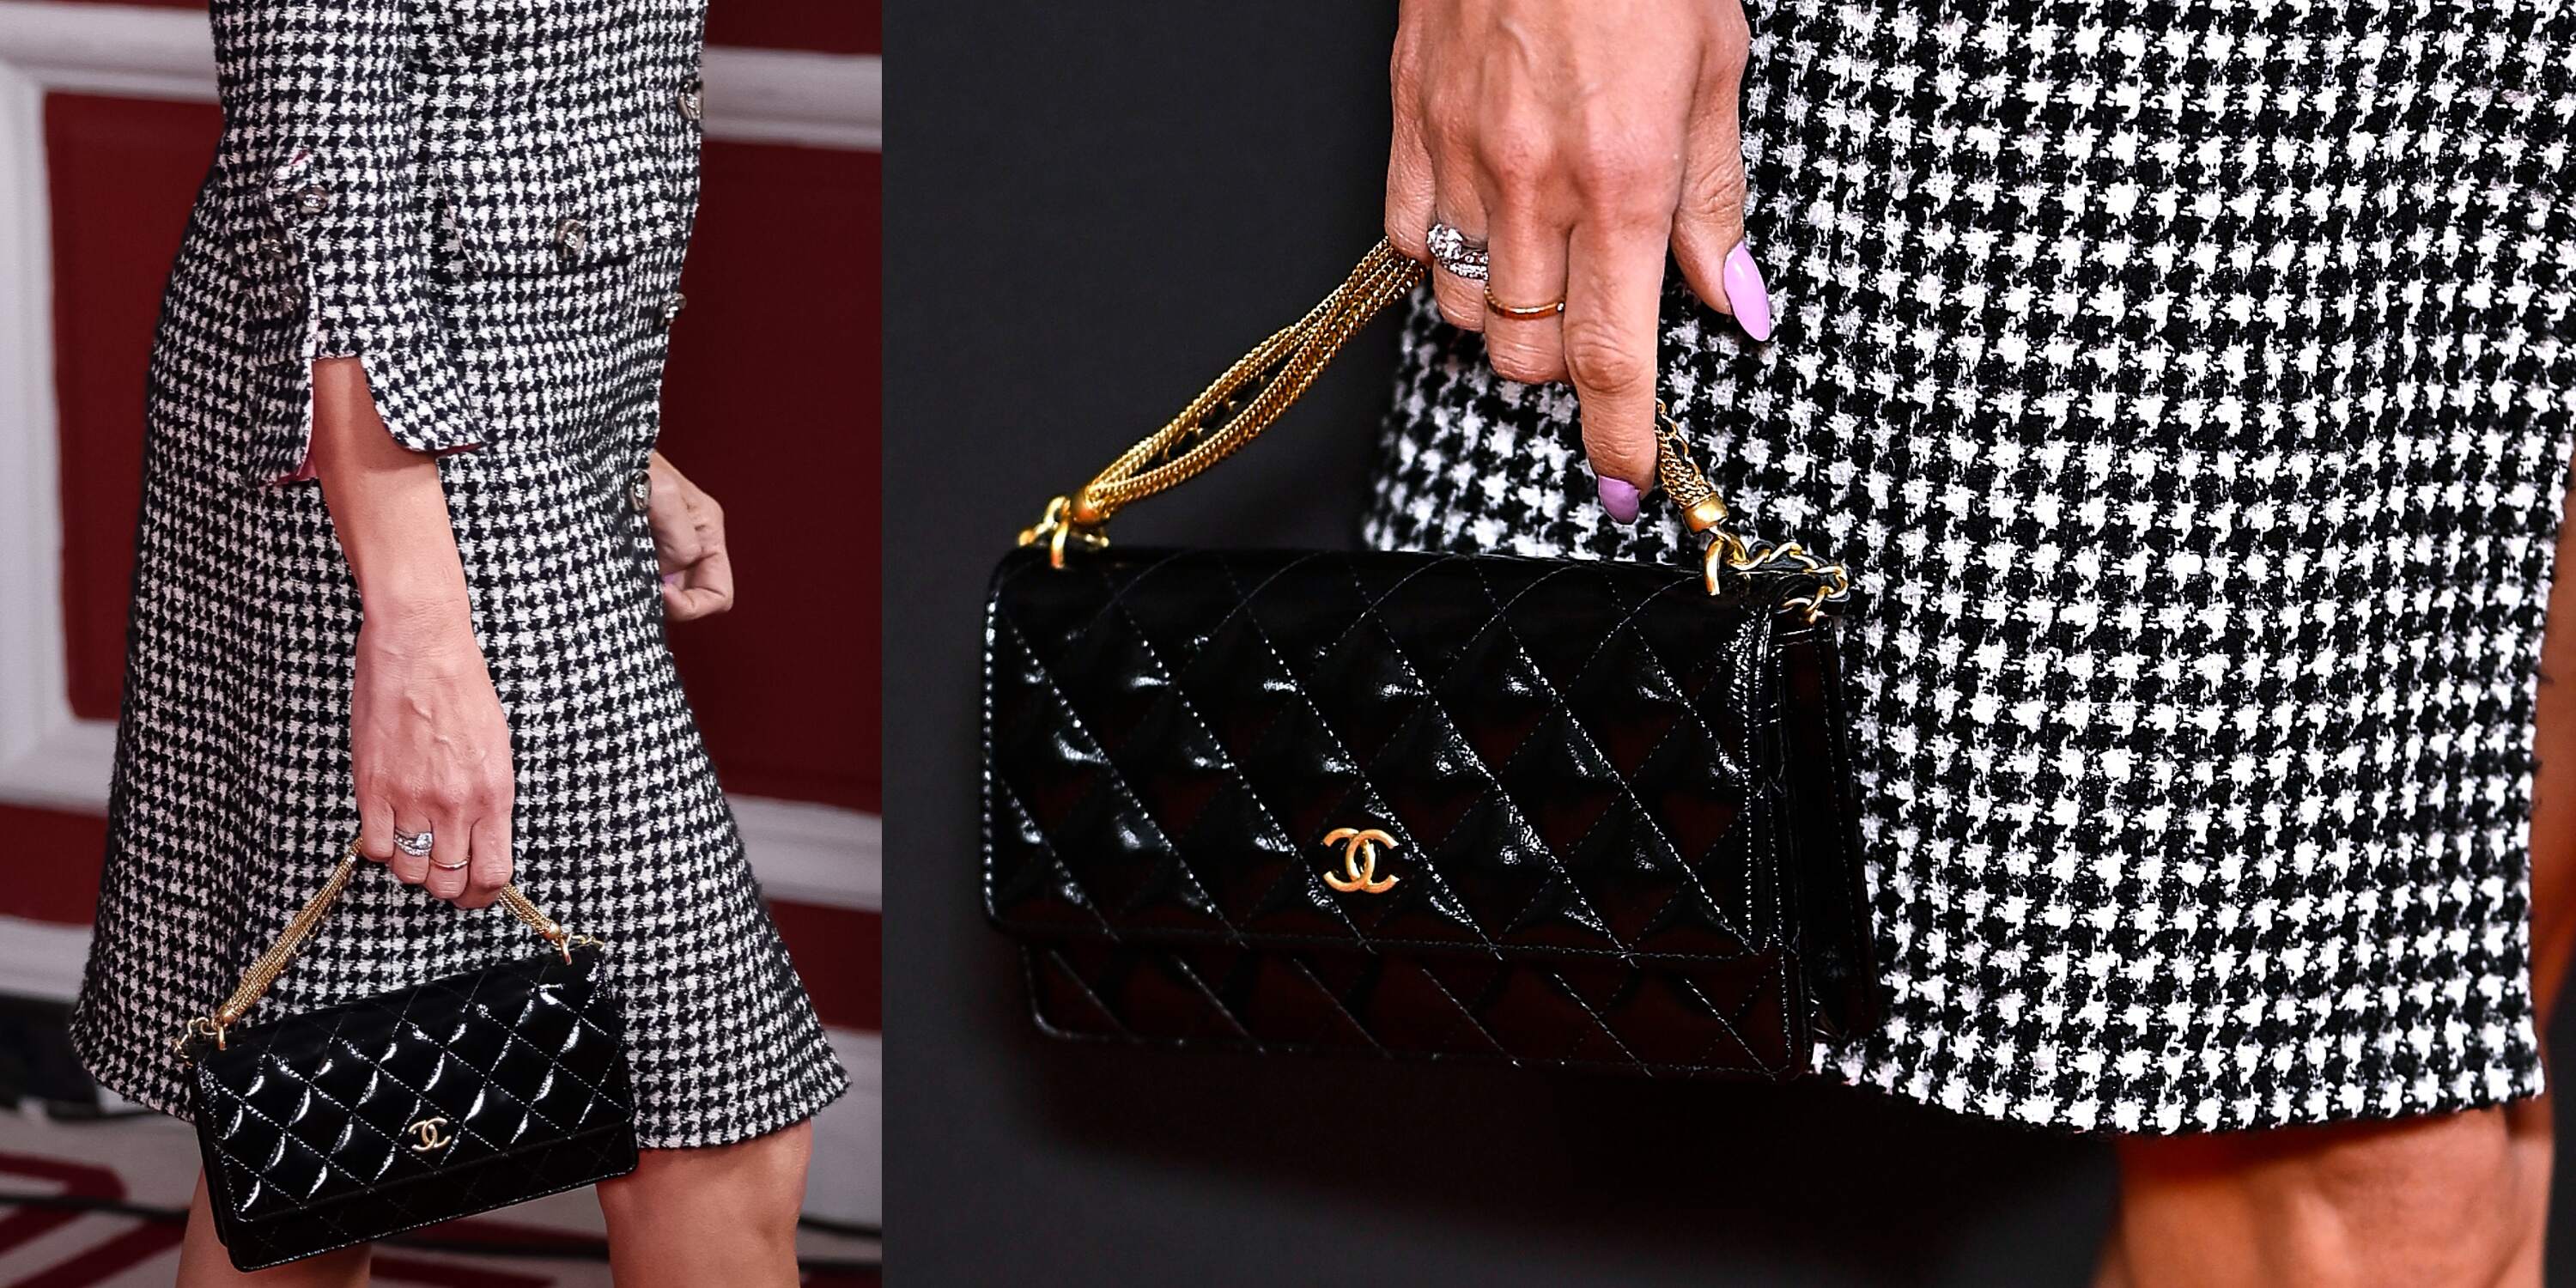 Actor Penélope Cruz's hand holds a black patent leather Chanel bag with gold accents